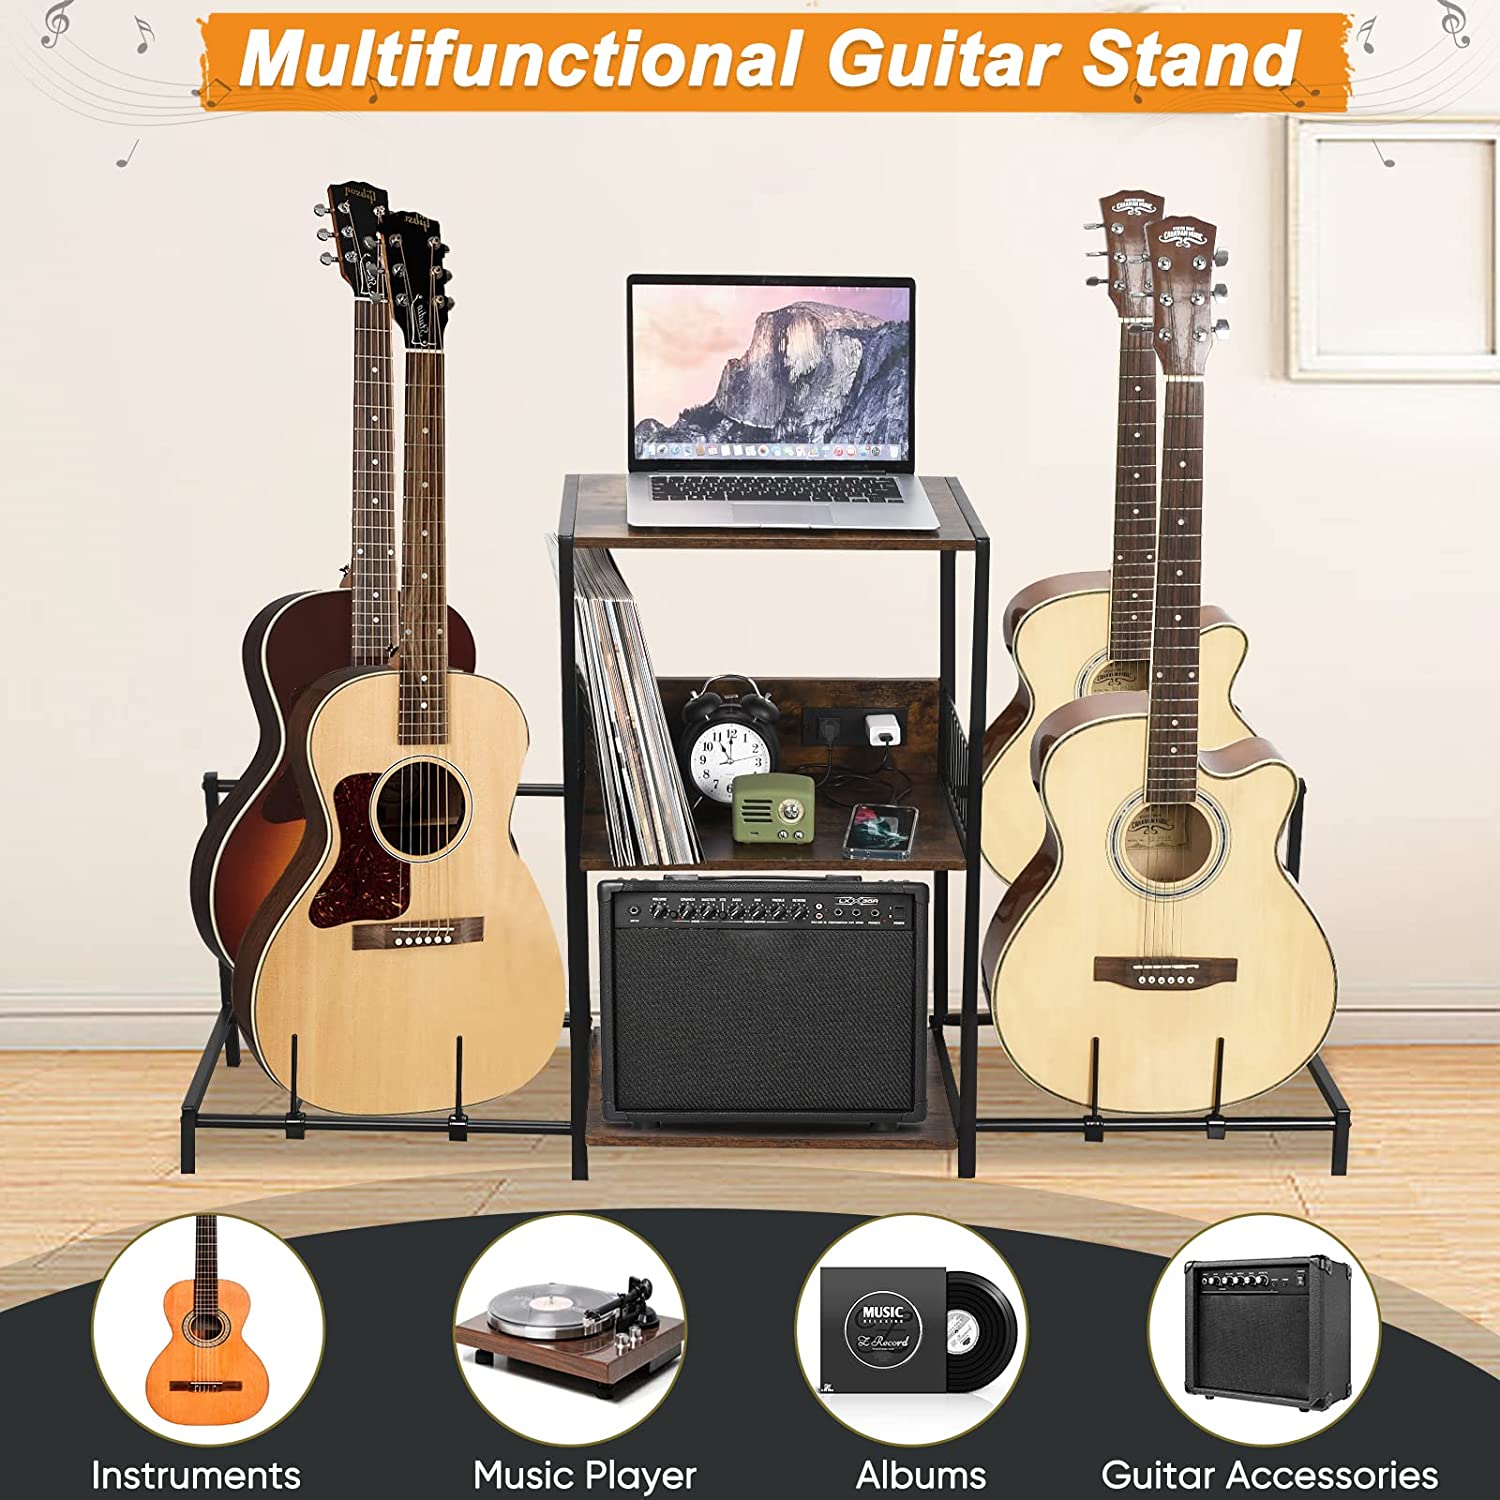 Guitar Stand with Charging Station, Guitar Rack Floor Adjustable for Multiple Guitars Holder for Acoustic, Electric Guitar, Bass, Guitar Amp Accessories, Guitars Display for Home Studio Music Room